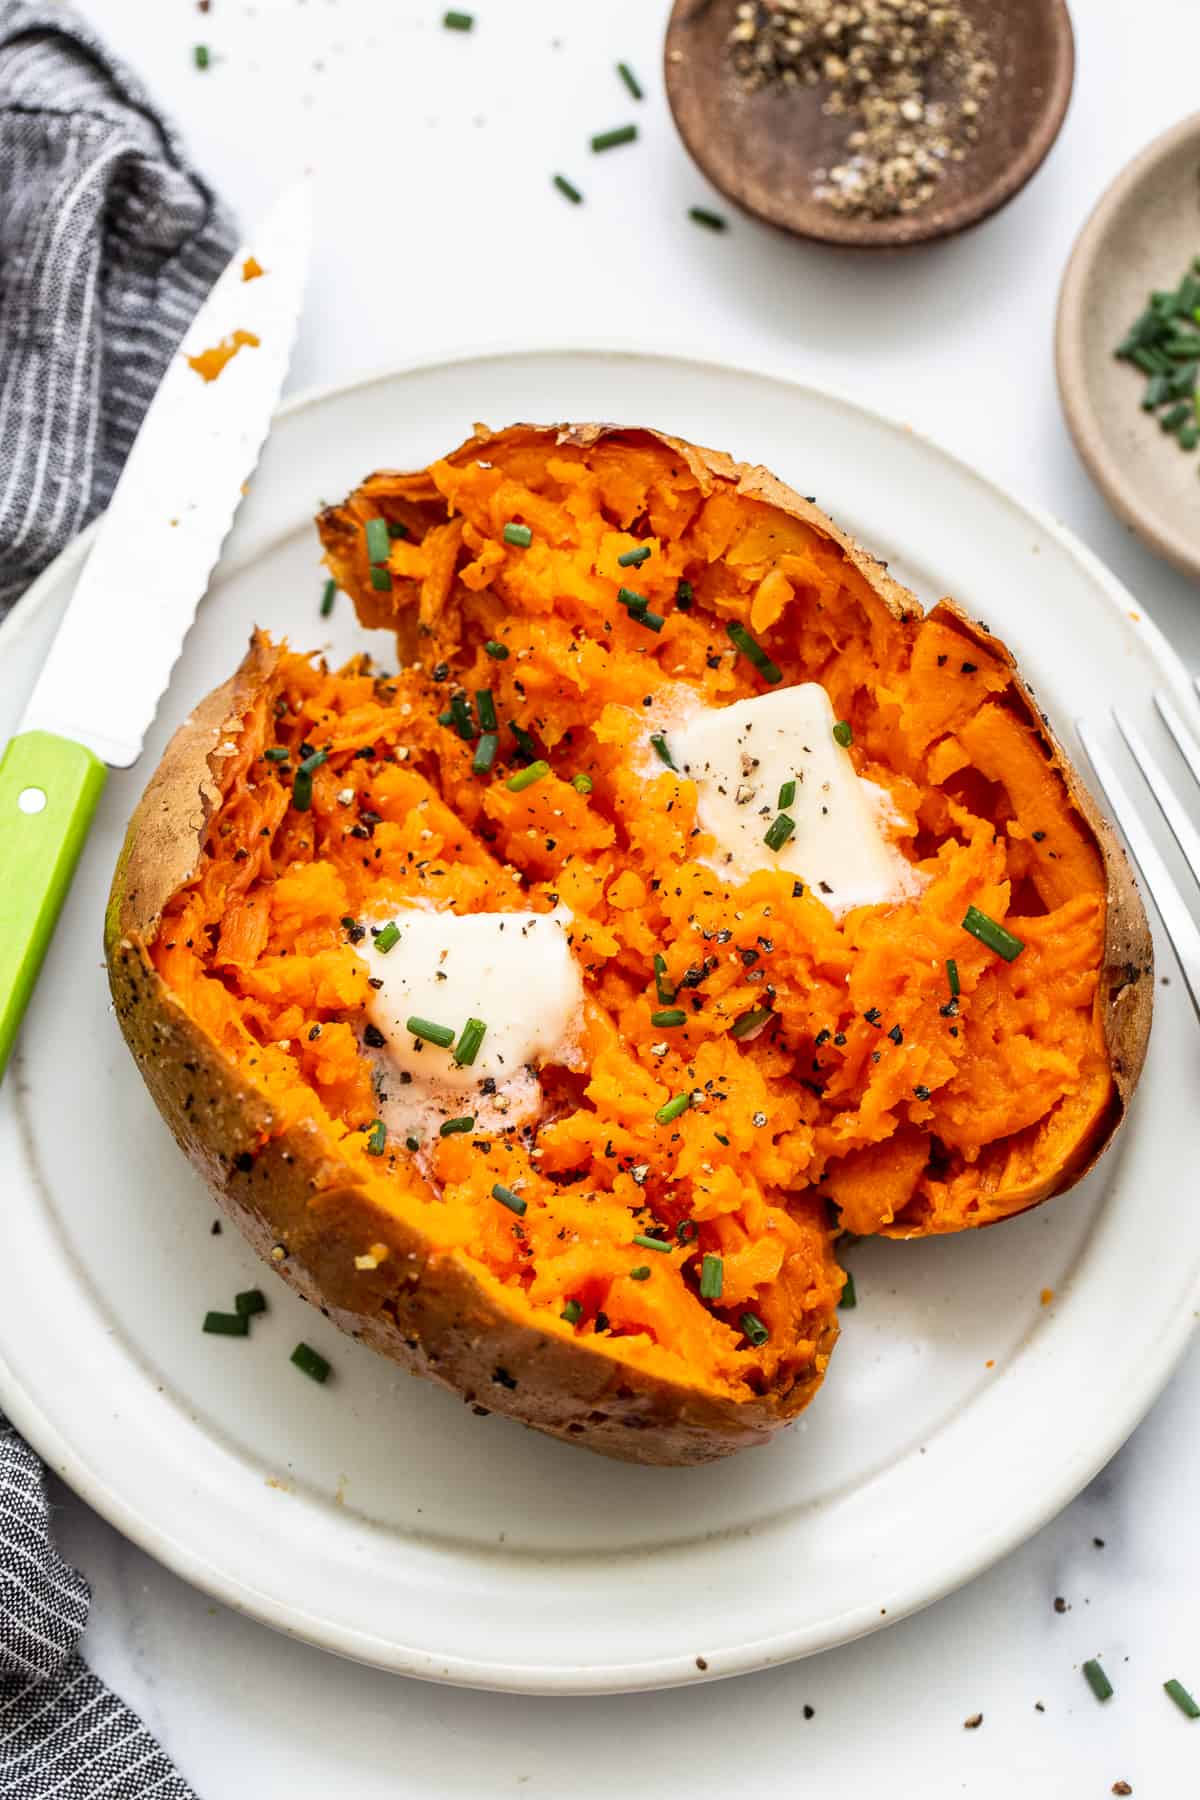 Baked sweet potato on a plate topped with butter.